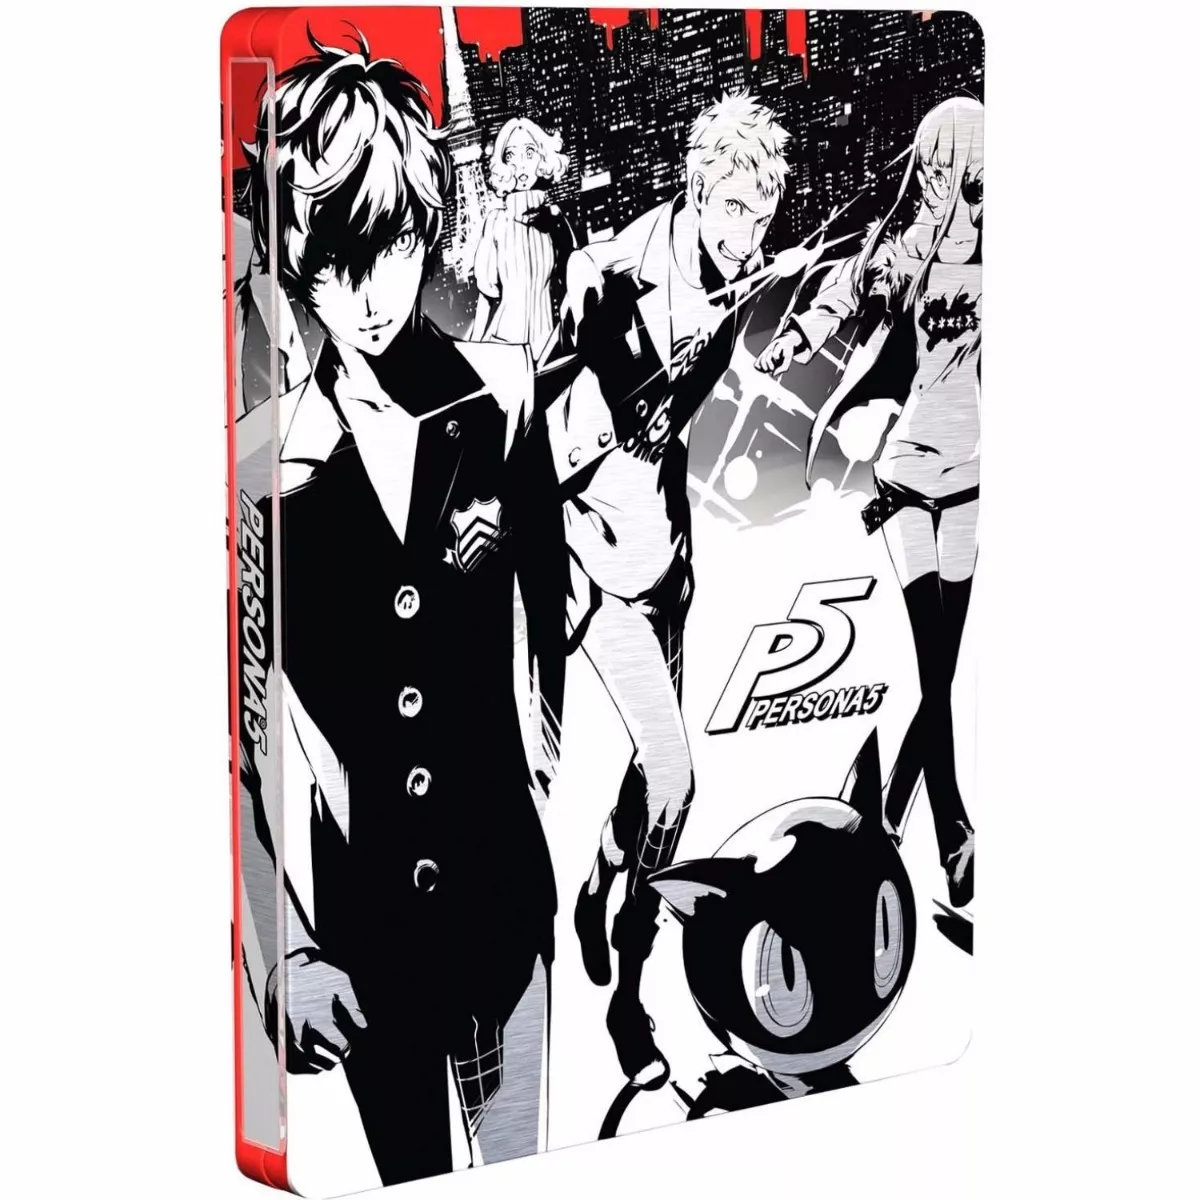 persona-5-steel-book-edition-limited-time-collectible-ps4-D_NQ_NP_648198-MLB26499849703_122017-F.webp